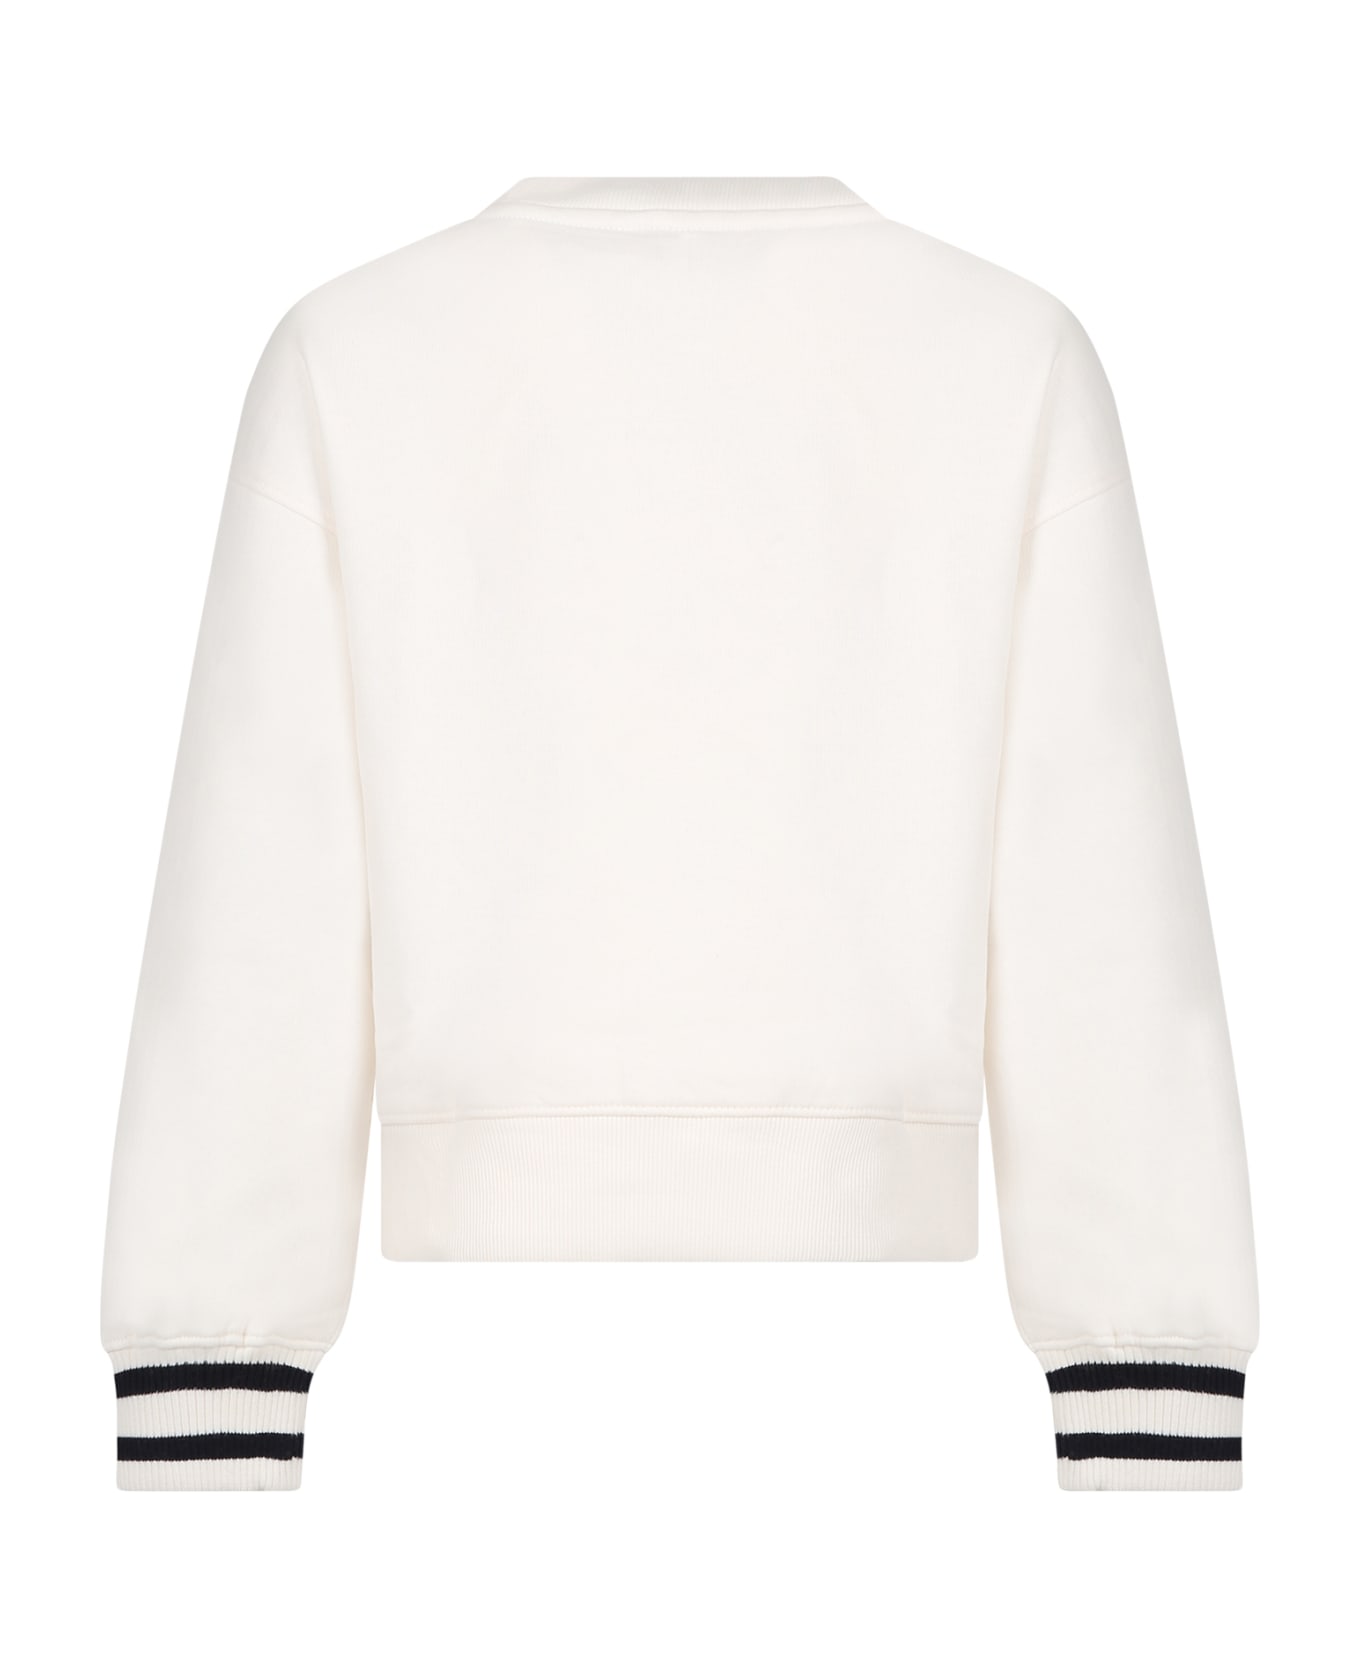 Tommy Hilfiger Ivory Sweatshirt For Girl With Logo - Ivory